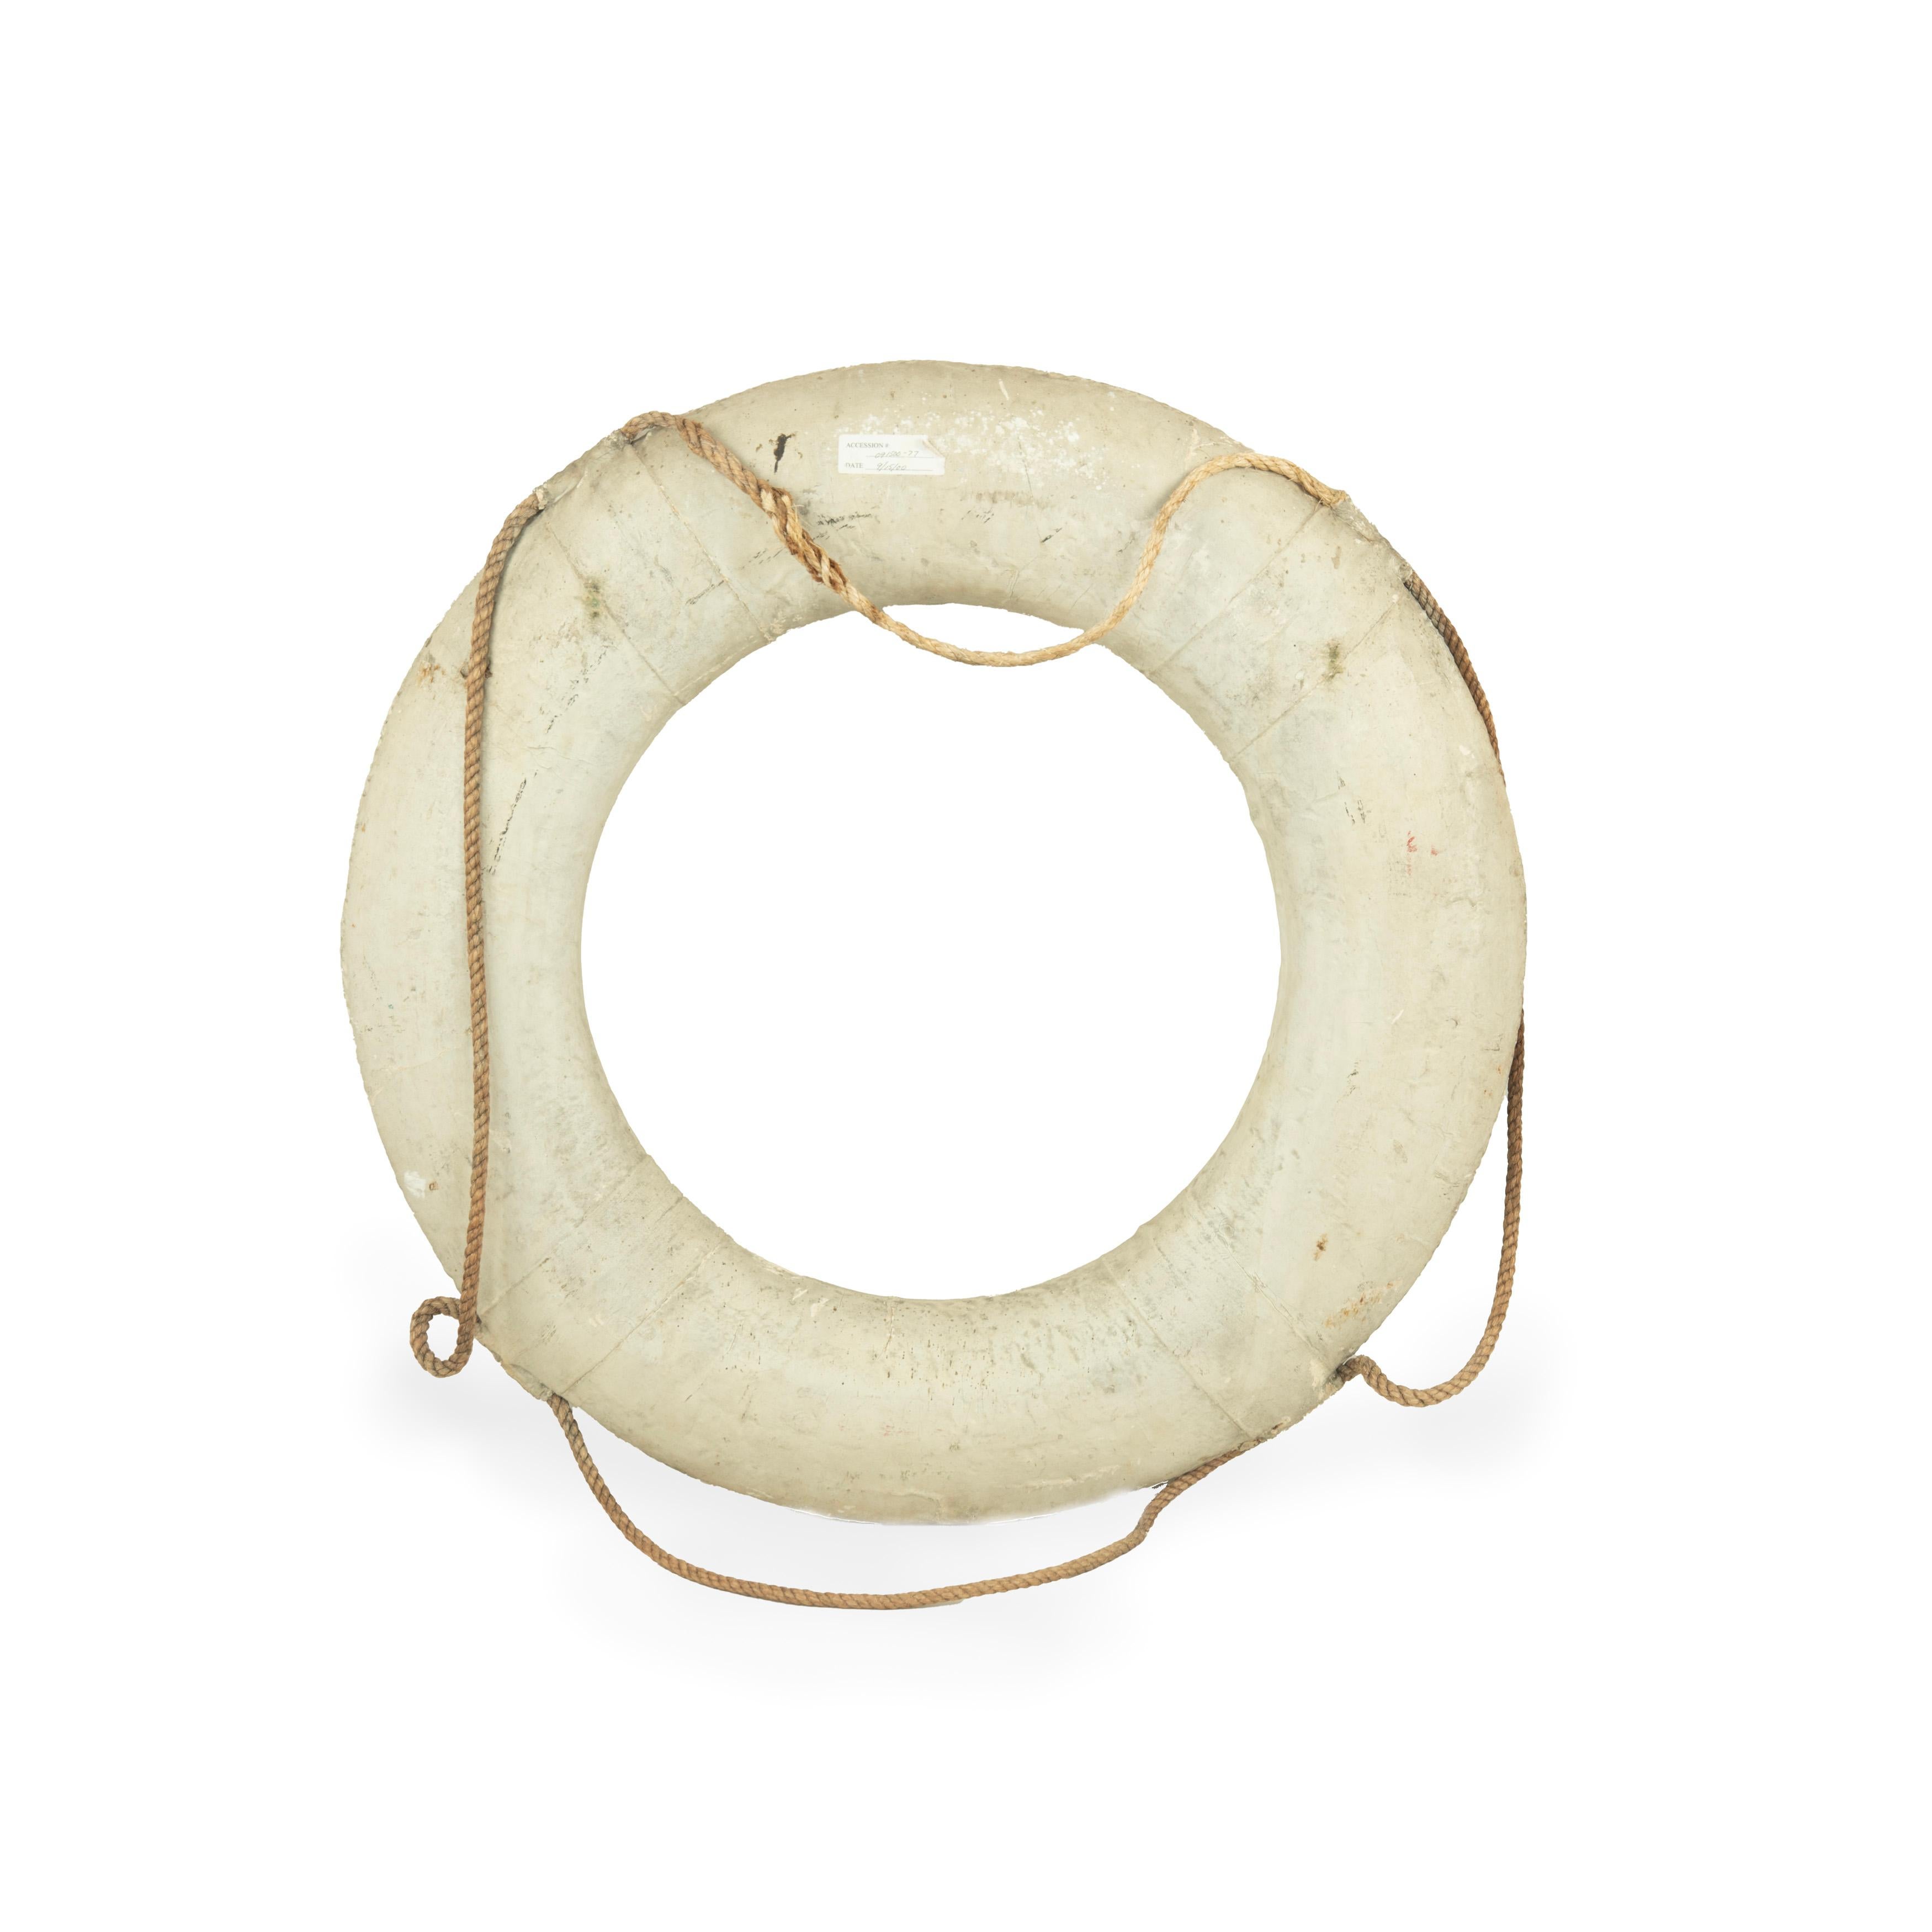 An original life ring from the America’s Cup yacht ‘Shamrock’, Royal Ulster Yacht Club, the circular ring painted in gilt outlined in green ‘Shamrock V, R.U.Y.C.’, on a white ground, with the original rope handles threaded though canvas straps. 